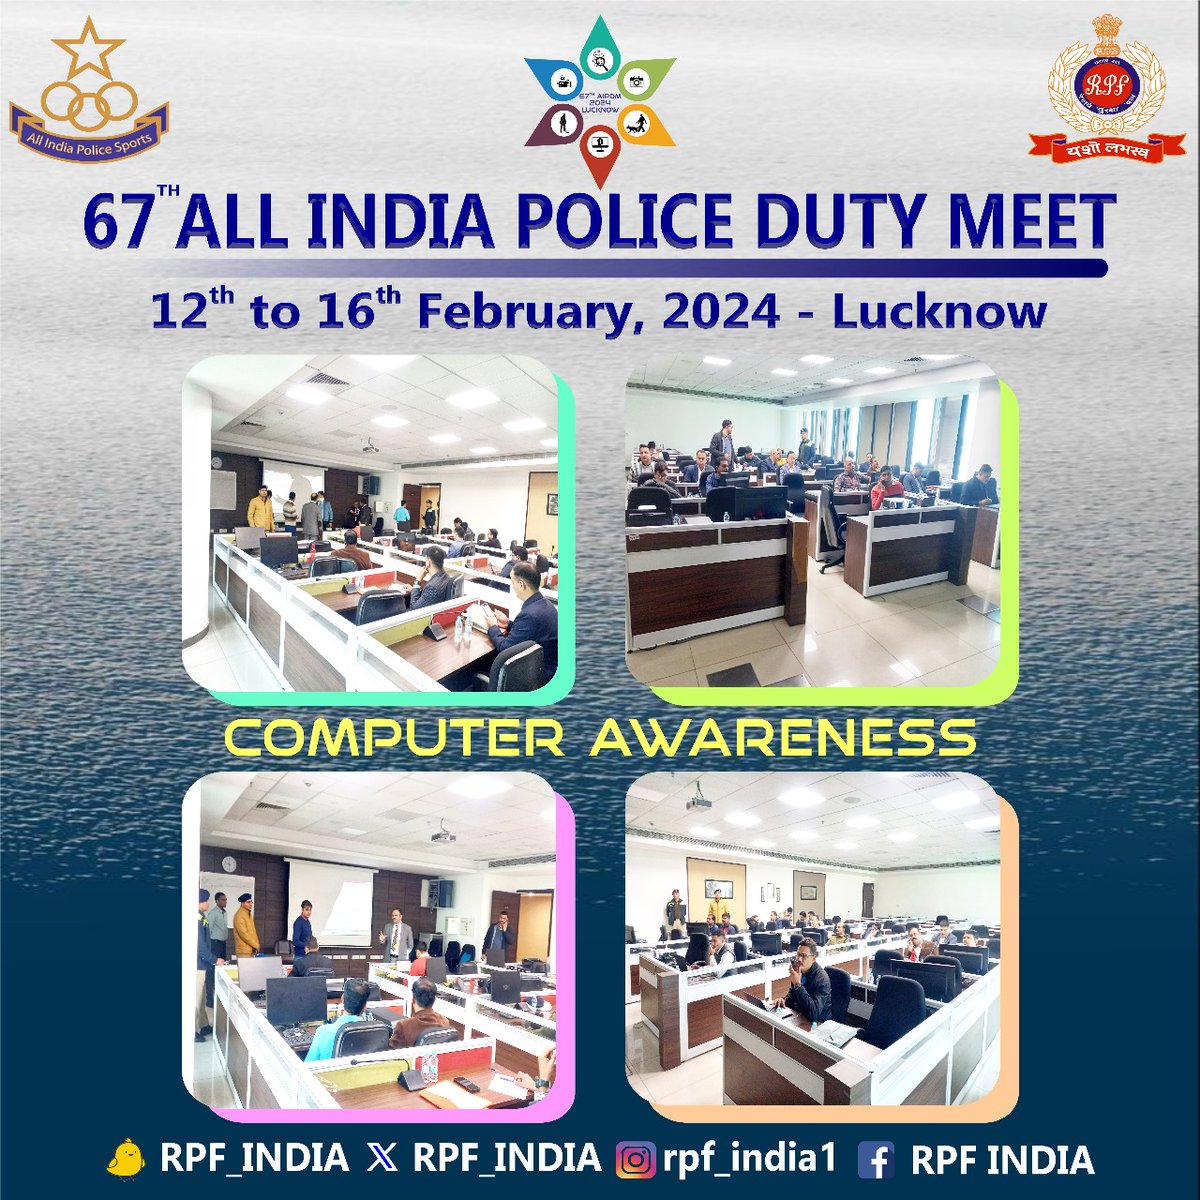 Elevating digital prowess at the 67th All India Police Duty Meet! The Computer Awareness Competition has begun, with participants competing for their tech-savvy skills. #PoliceTechChallenge #DigitalAwareness #67thAIPDM 
@aipscb @RailMinIndia @HMOIndia